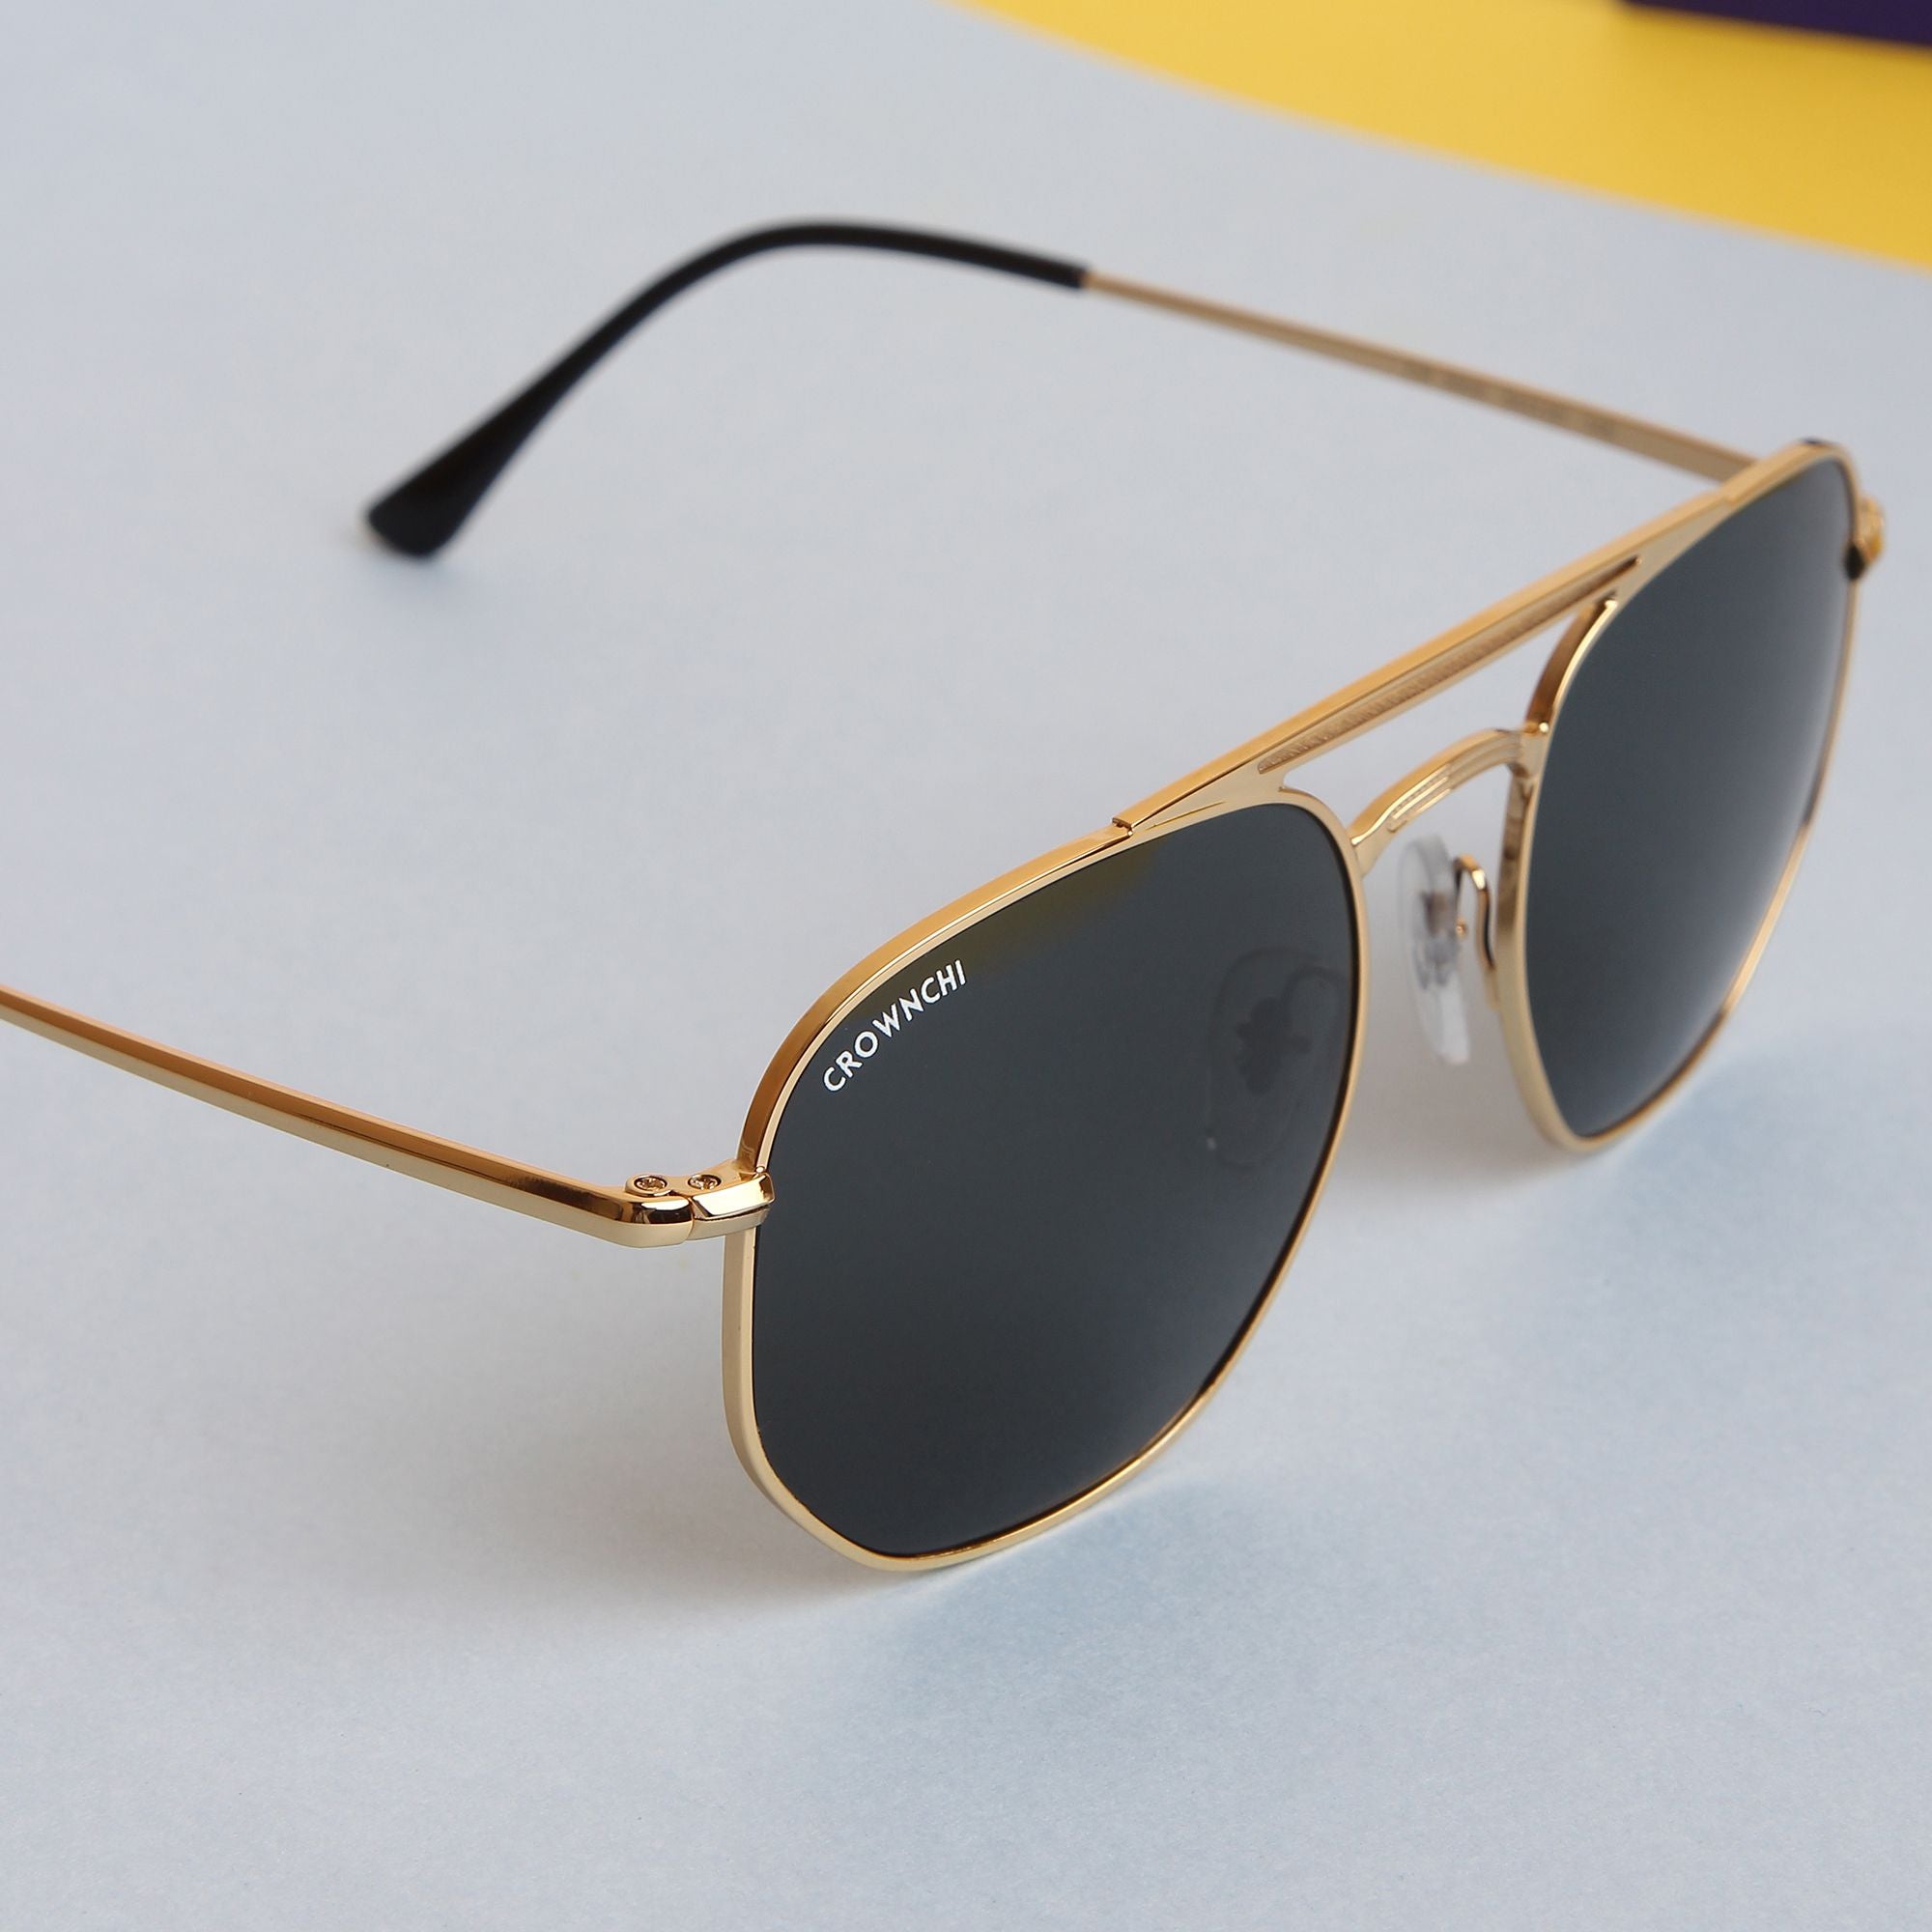 Moscow Gold Black Round Edition Sunglasses